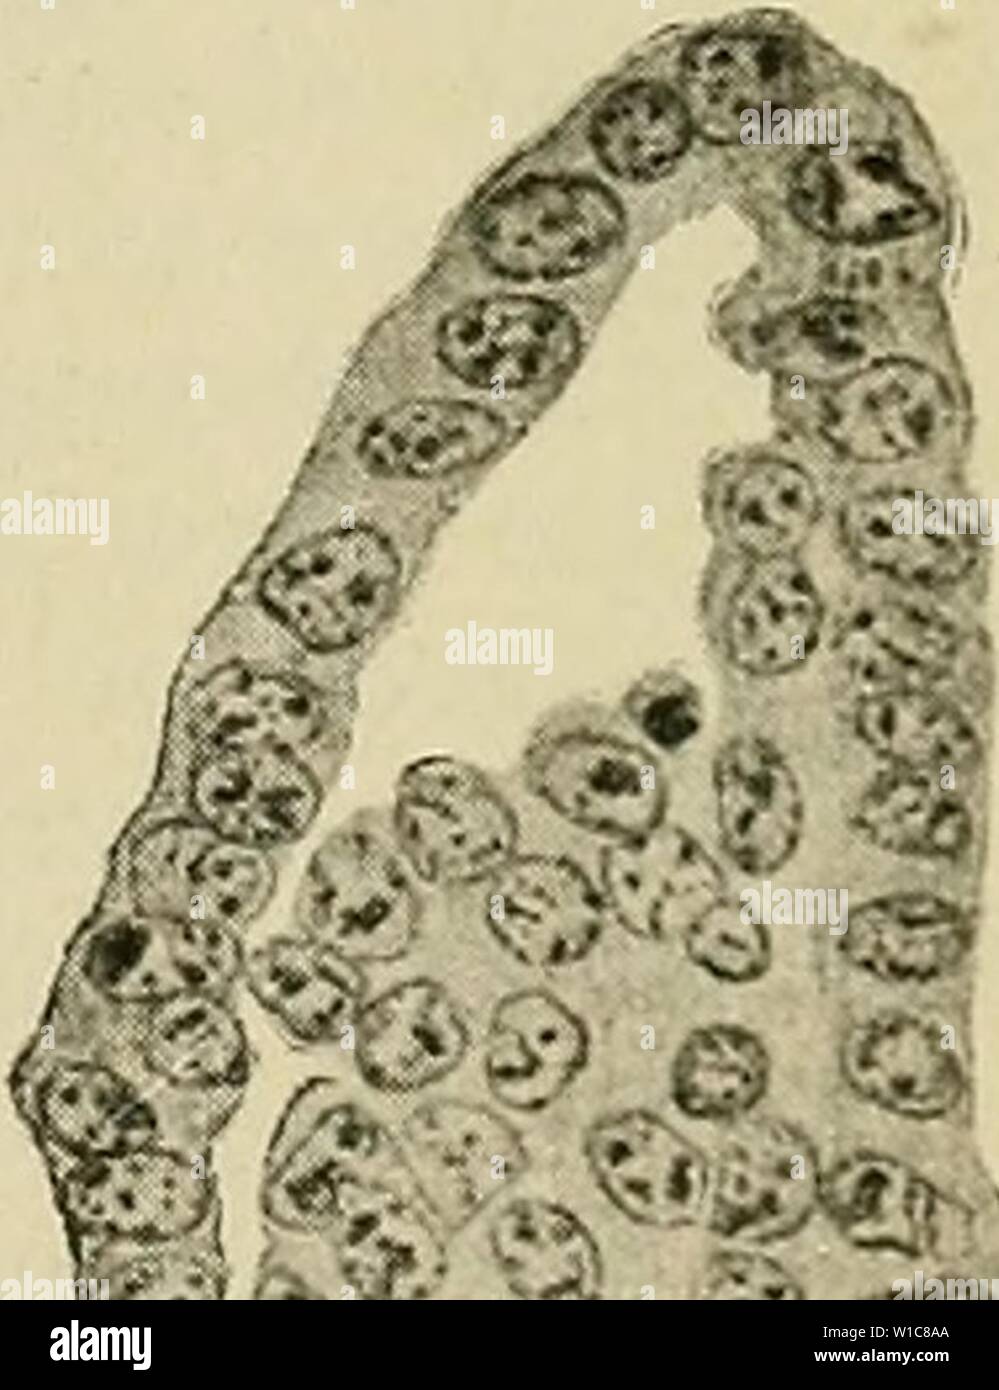 Archive image from page 56 of The development of the human. The development of the human body : a manual of human embryology . developmentofhum00mcmu Year: 1914  '1. - v â â â ,. D Fig. 22.âLater Stages in the Segmentation of the Ovum of a Bat. A, C, and D are sections, B a surface view.â(Van Beneden.) Stock Photo